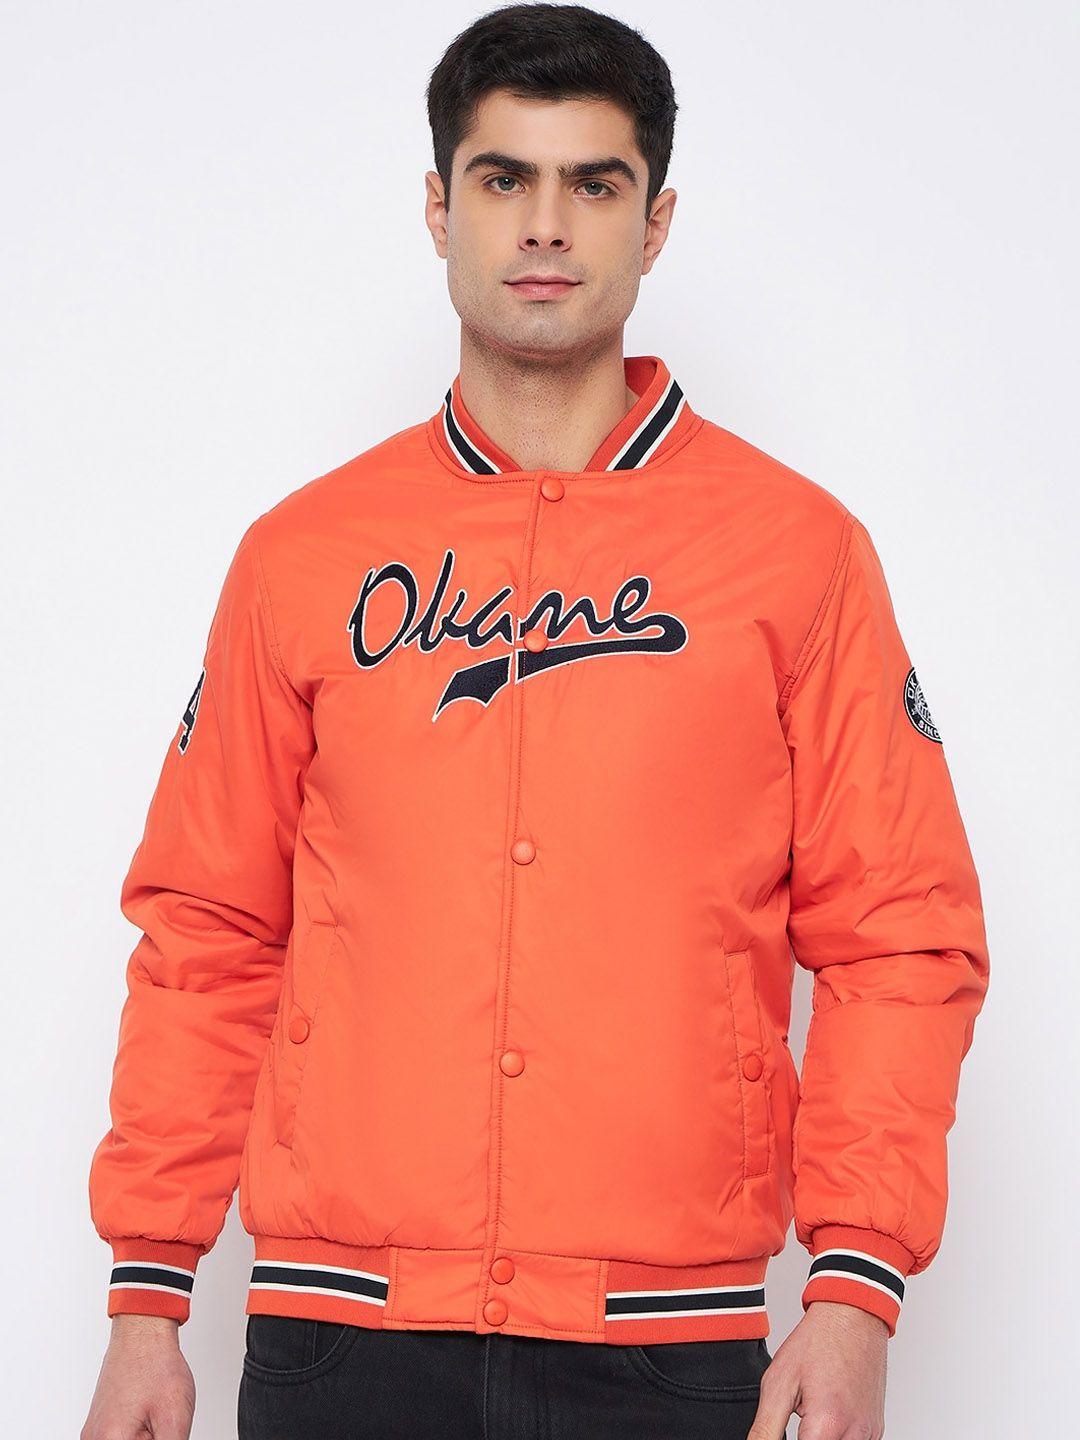 okane-men-lightweight-bomber-with-embroidered-jacket